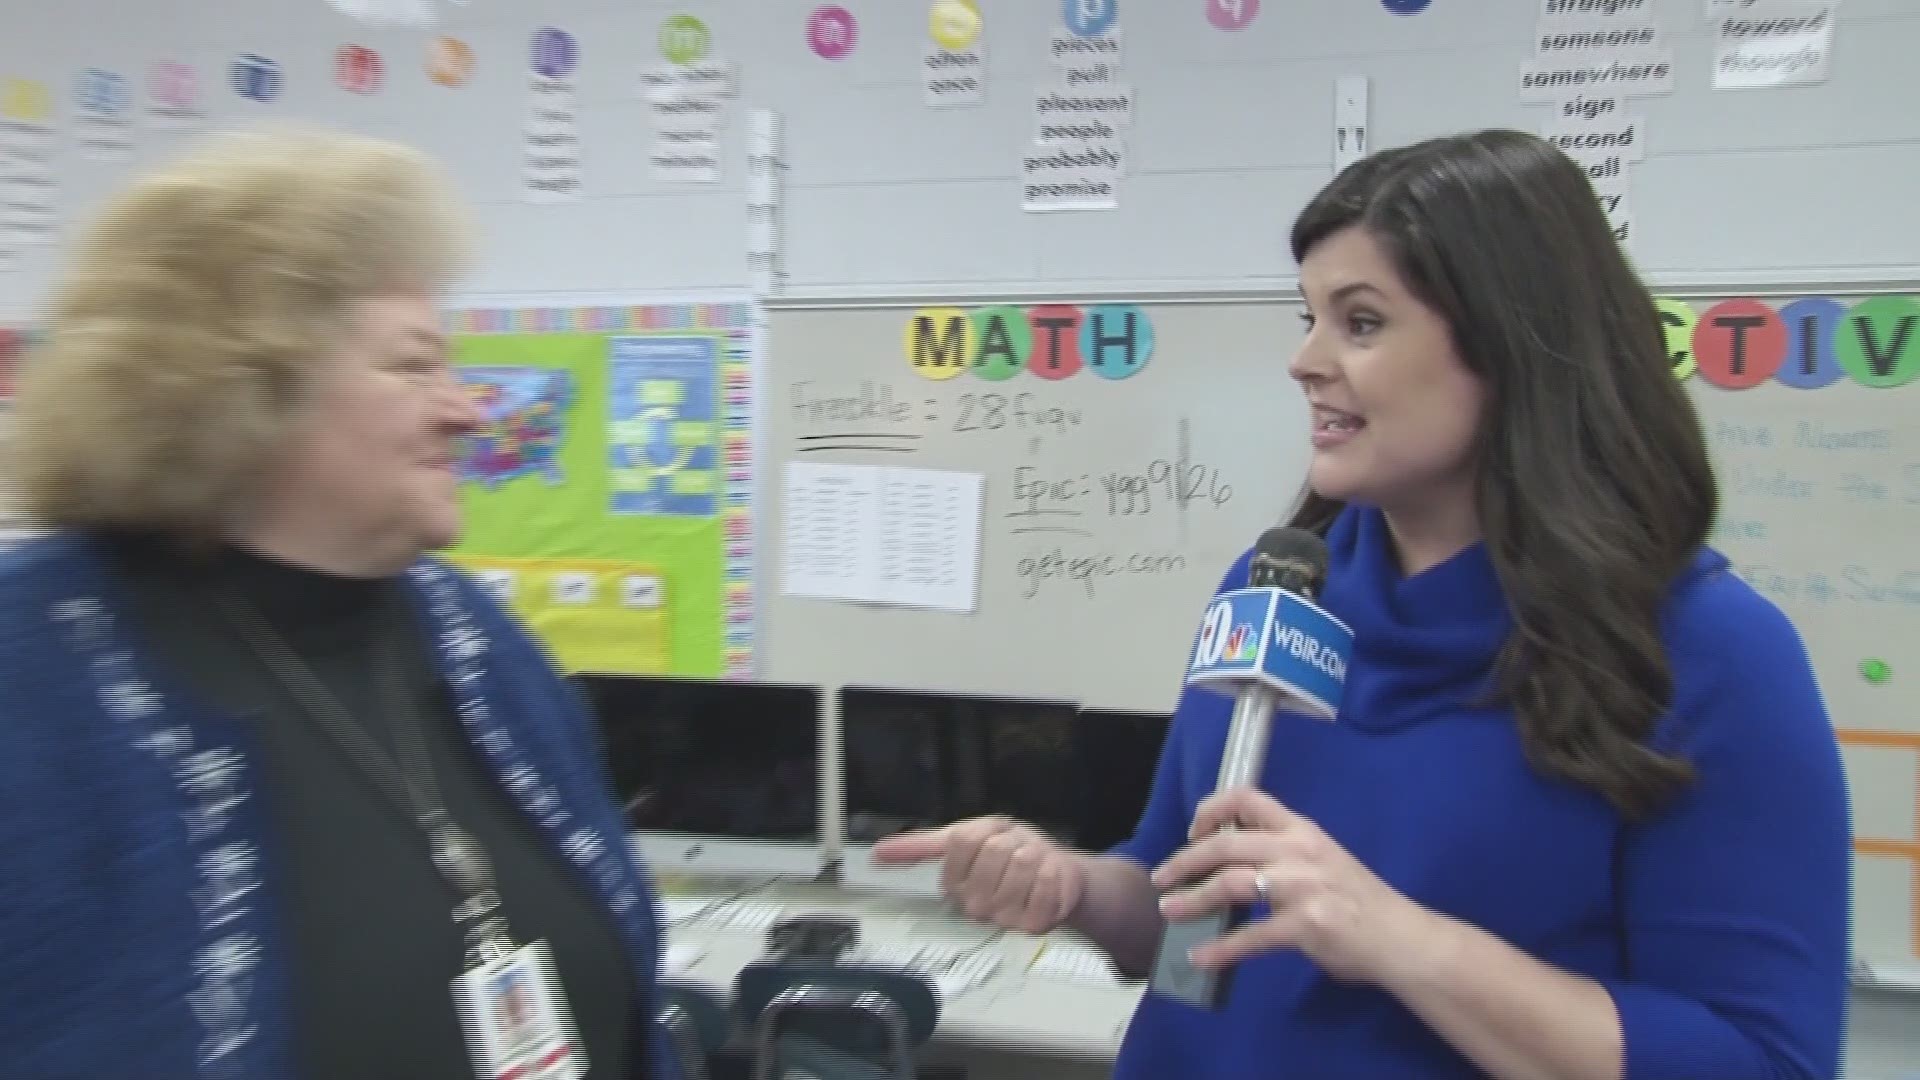 10News anchor Heather Waliga visited Christenberry Elementary on Feb. 19, 2020, to see what makes them so cool.